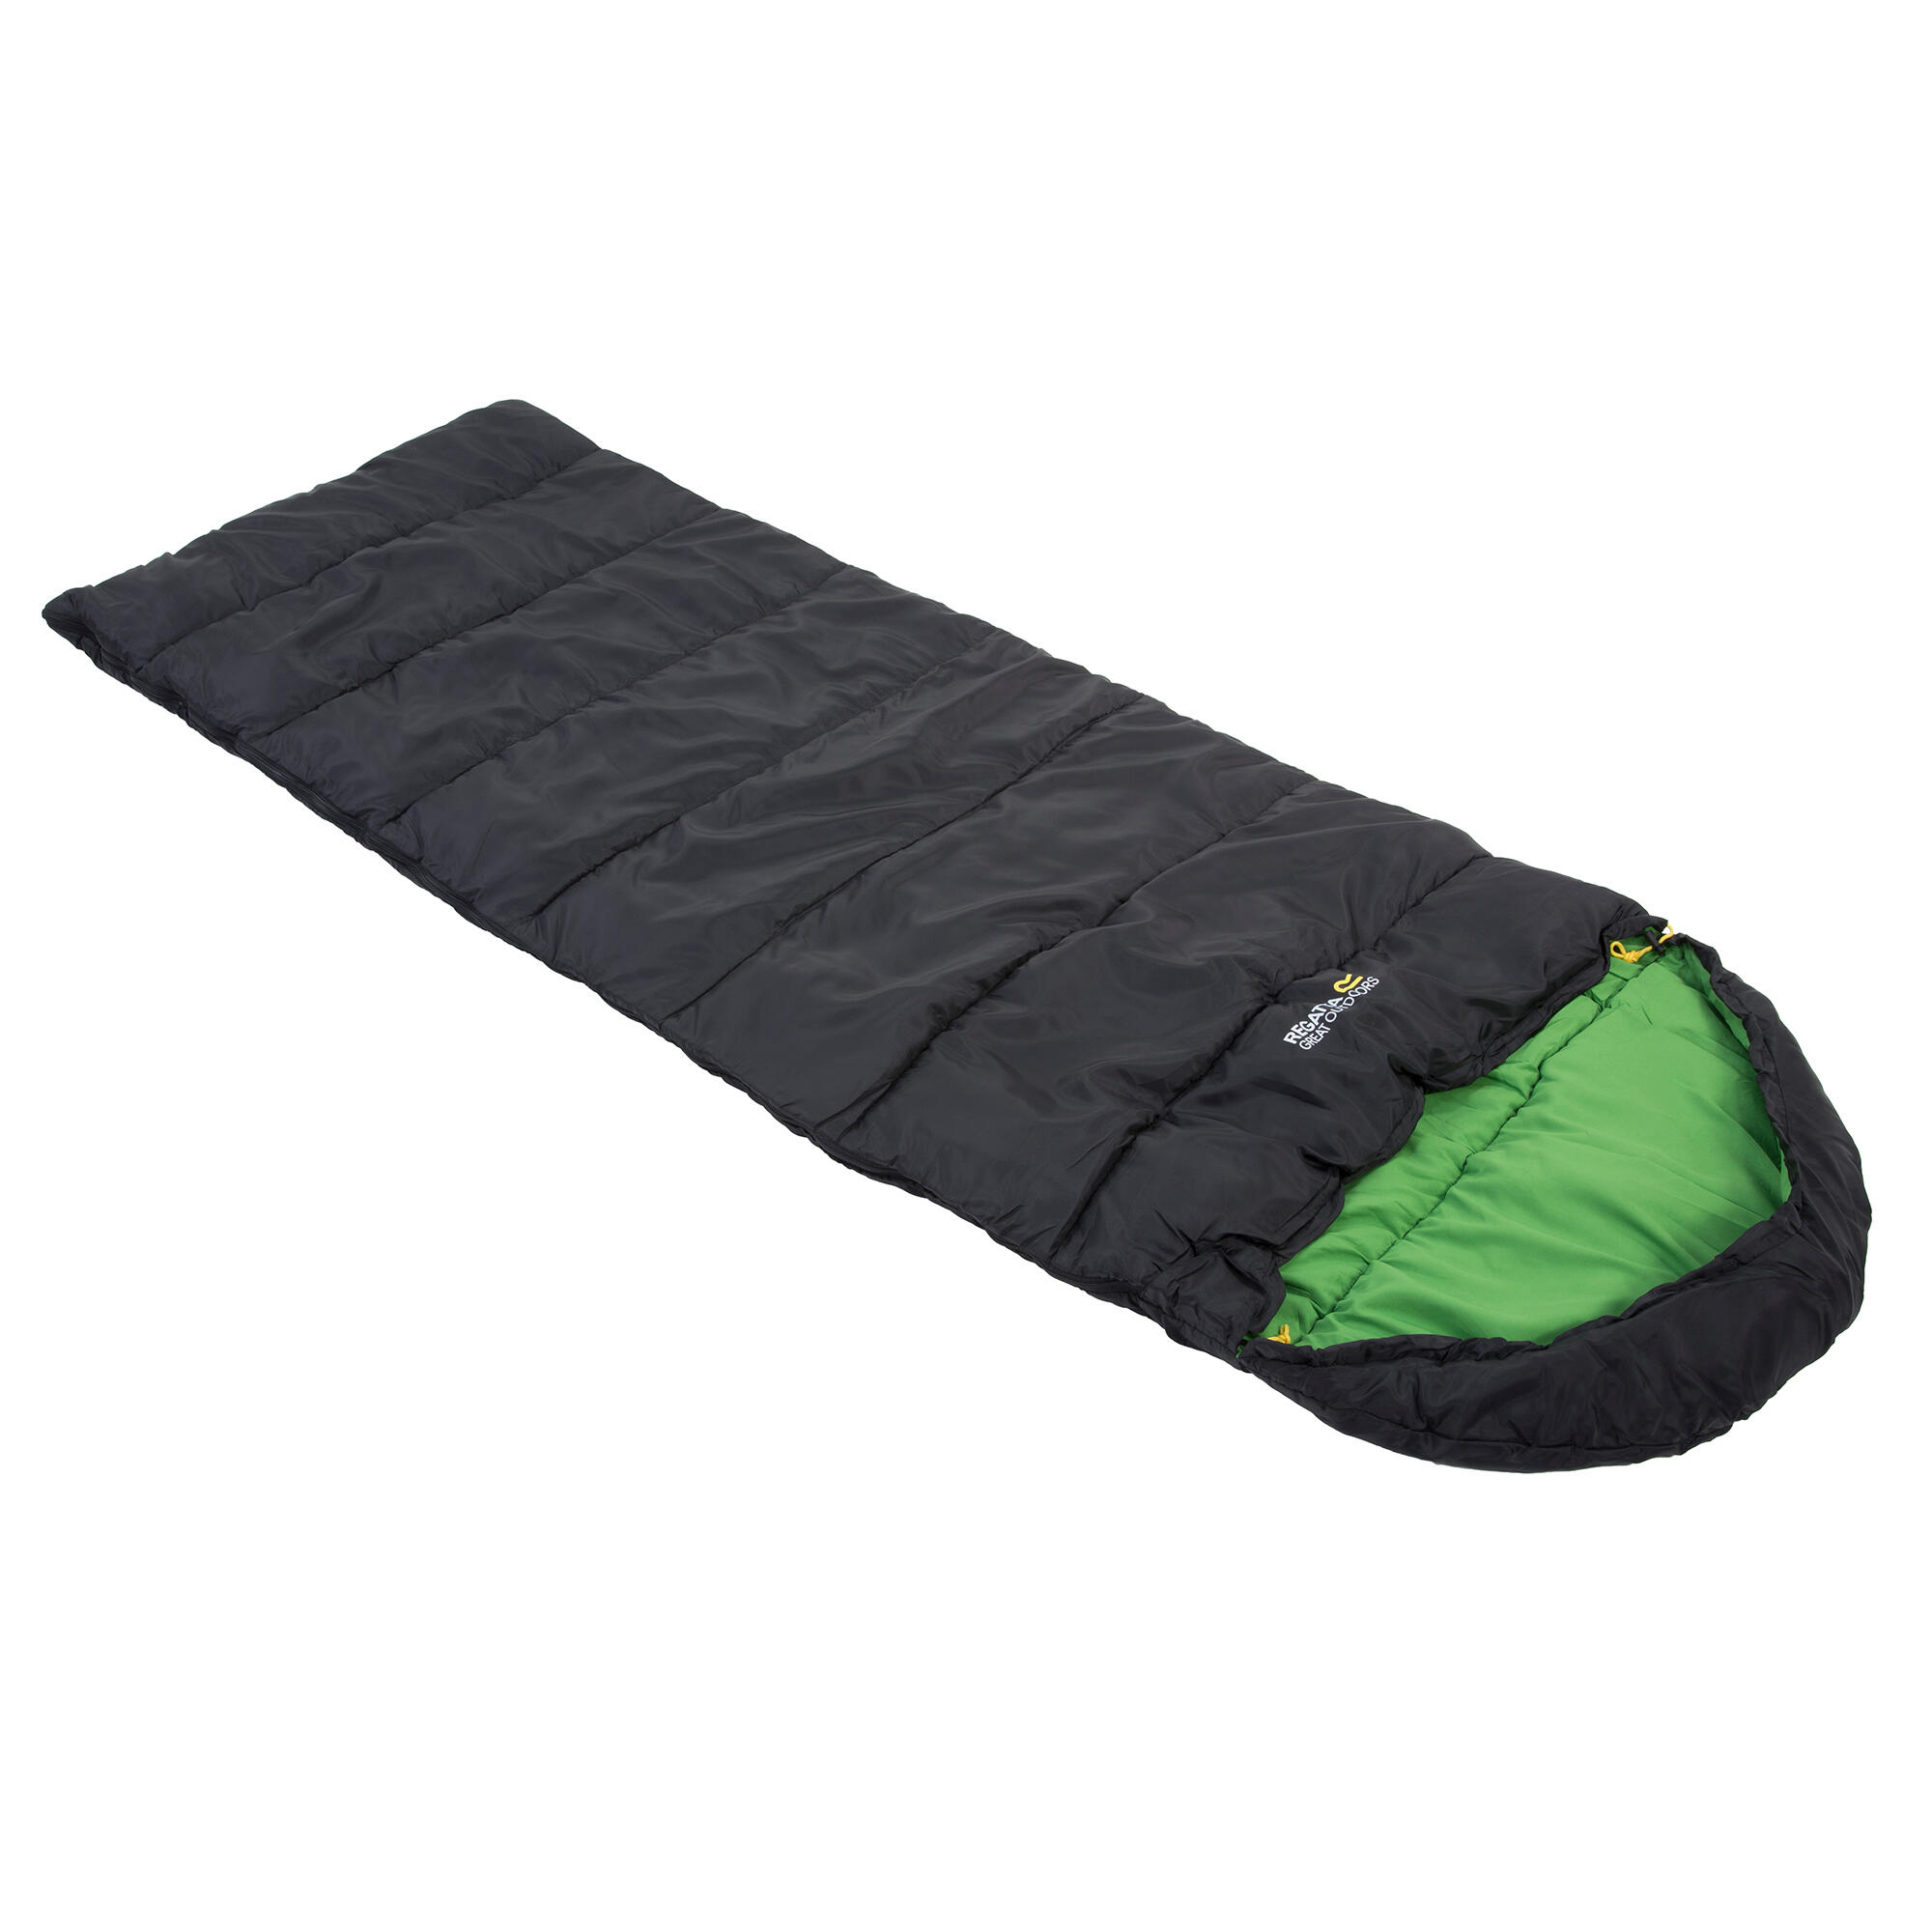 Buy Kefi Outdoors Army Sleeping Bag for Adults up to 62ft  0 to 10C  Lightweight Waterproof Winter Sleeping Bag  Best for Backpacking Camping  Expeditions Mountain Hiking Traveling Camo0 Online at